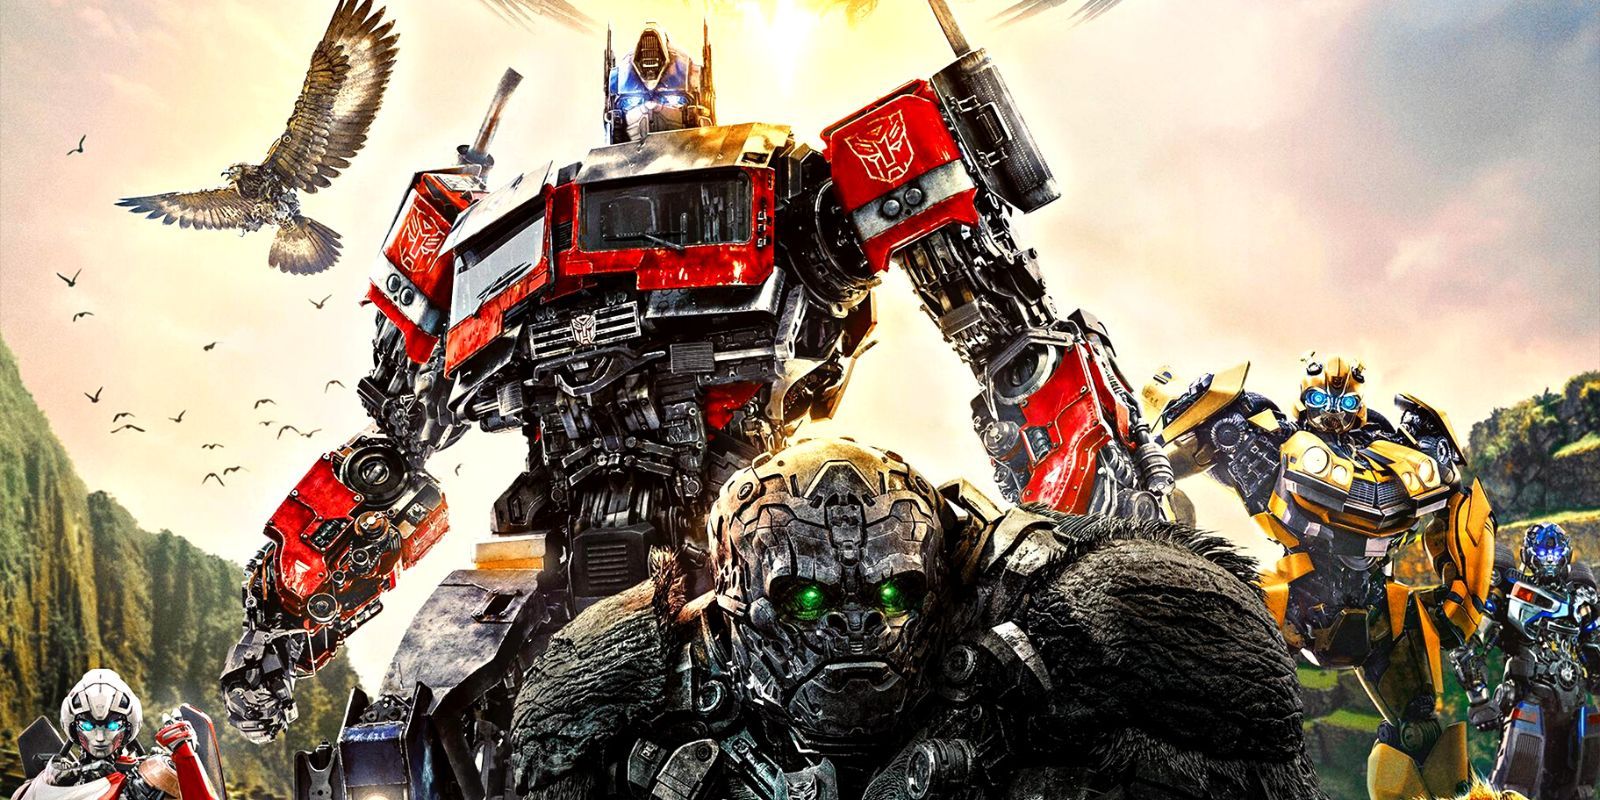 Optimus Prime stands over Optimus Primal, backed by his Autobots in Transformers: Rise of the Beasts